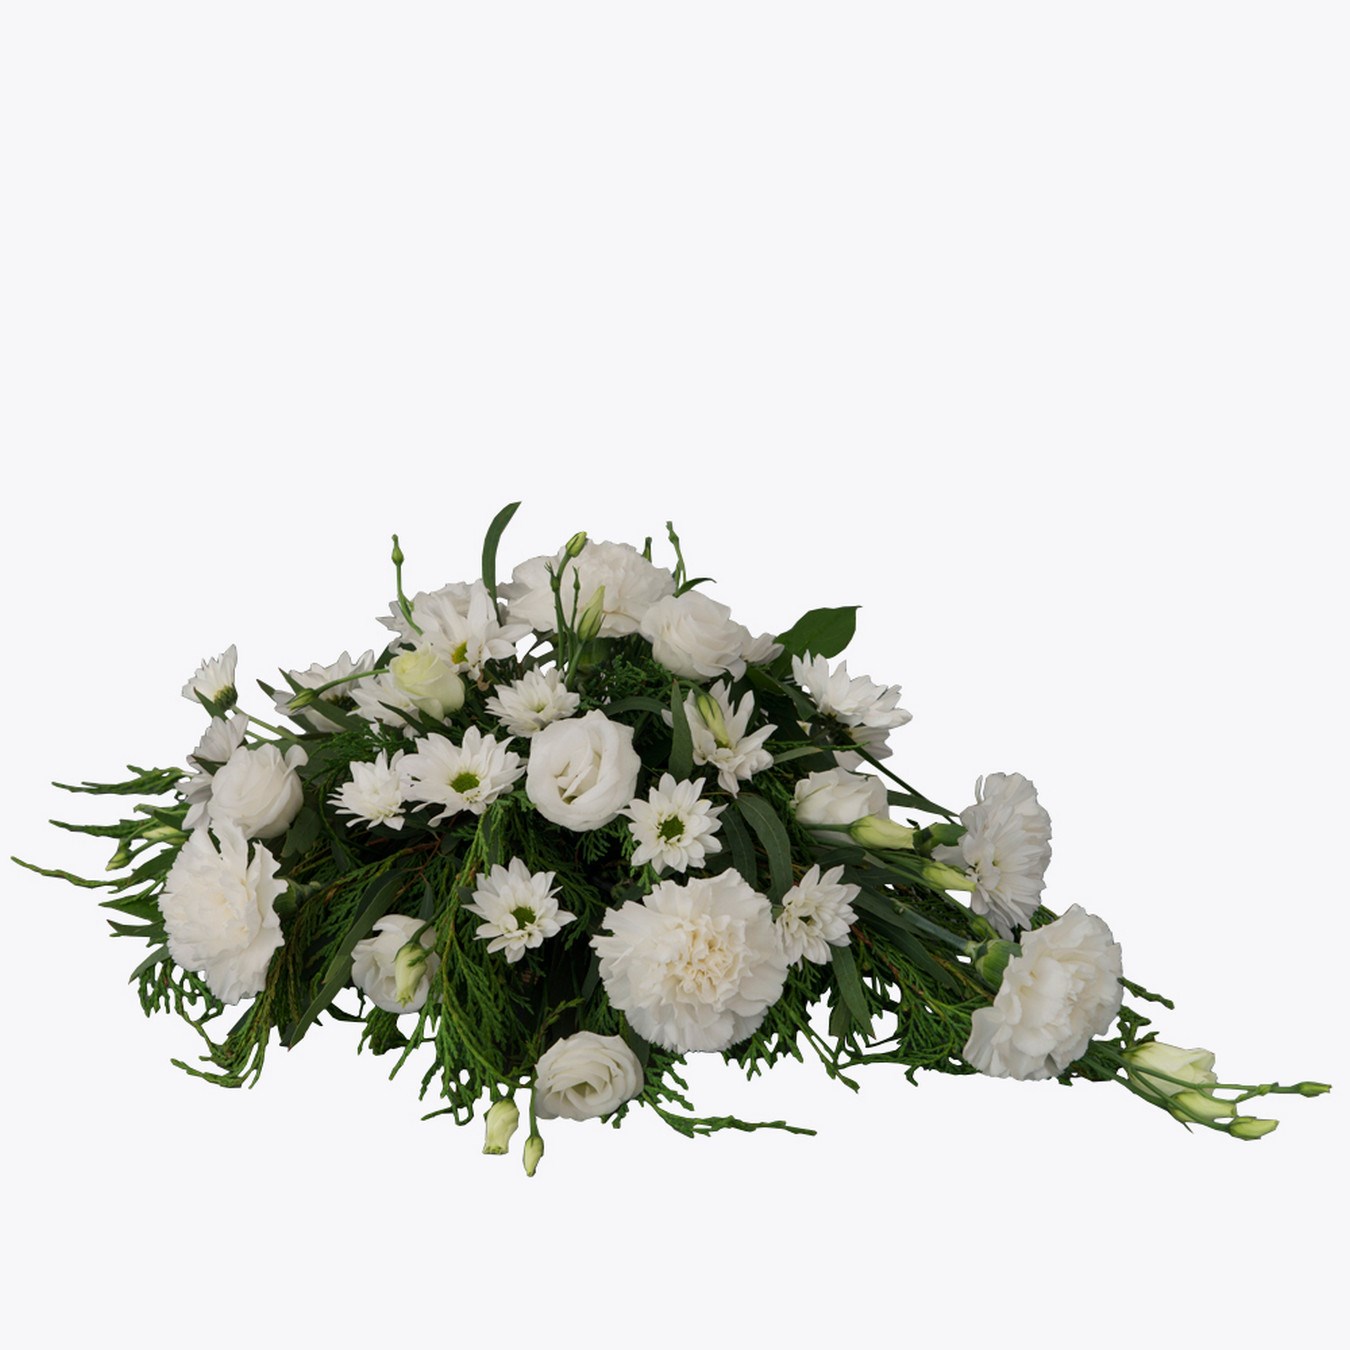 product image for Funeral Arrangement Spray